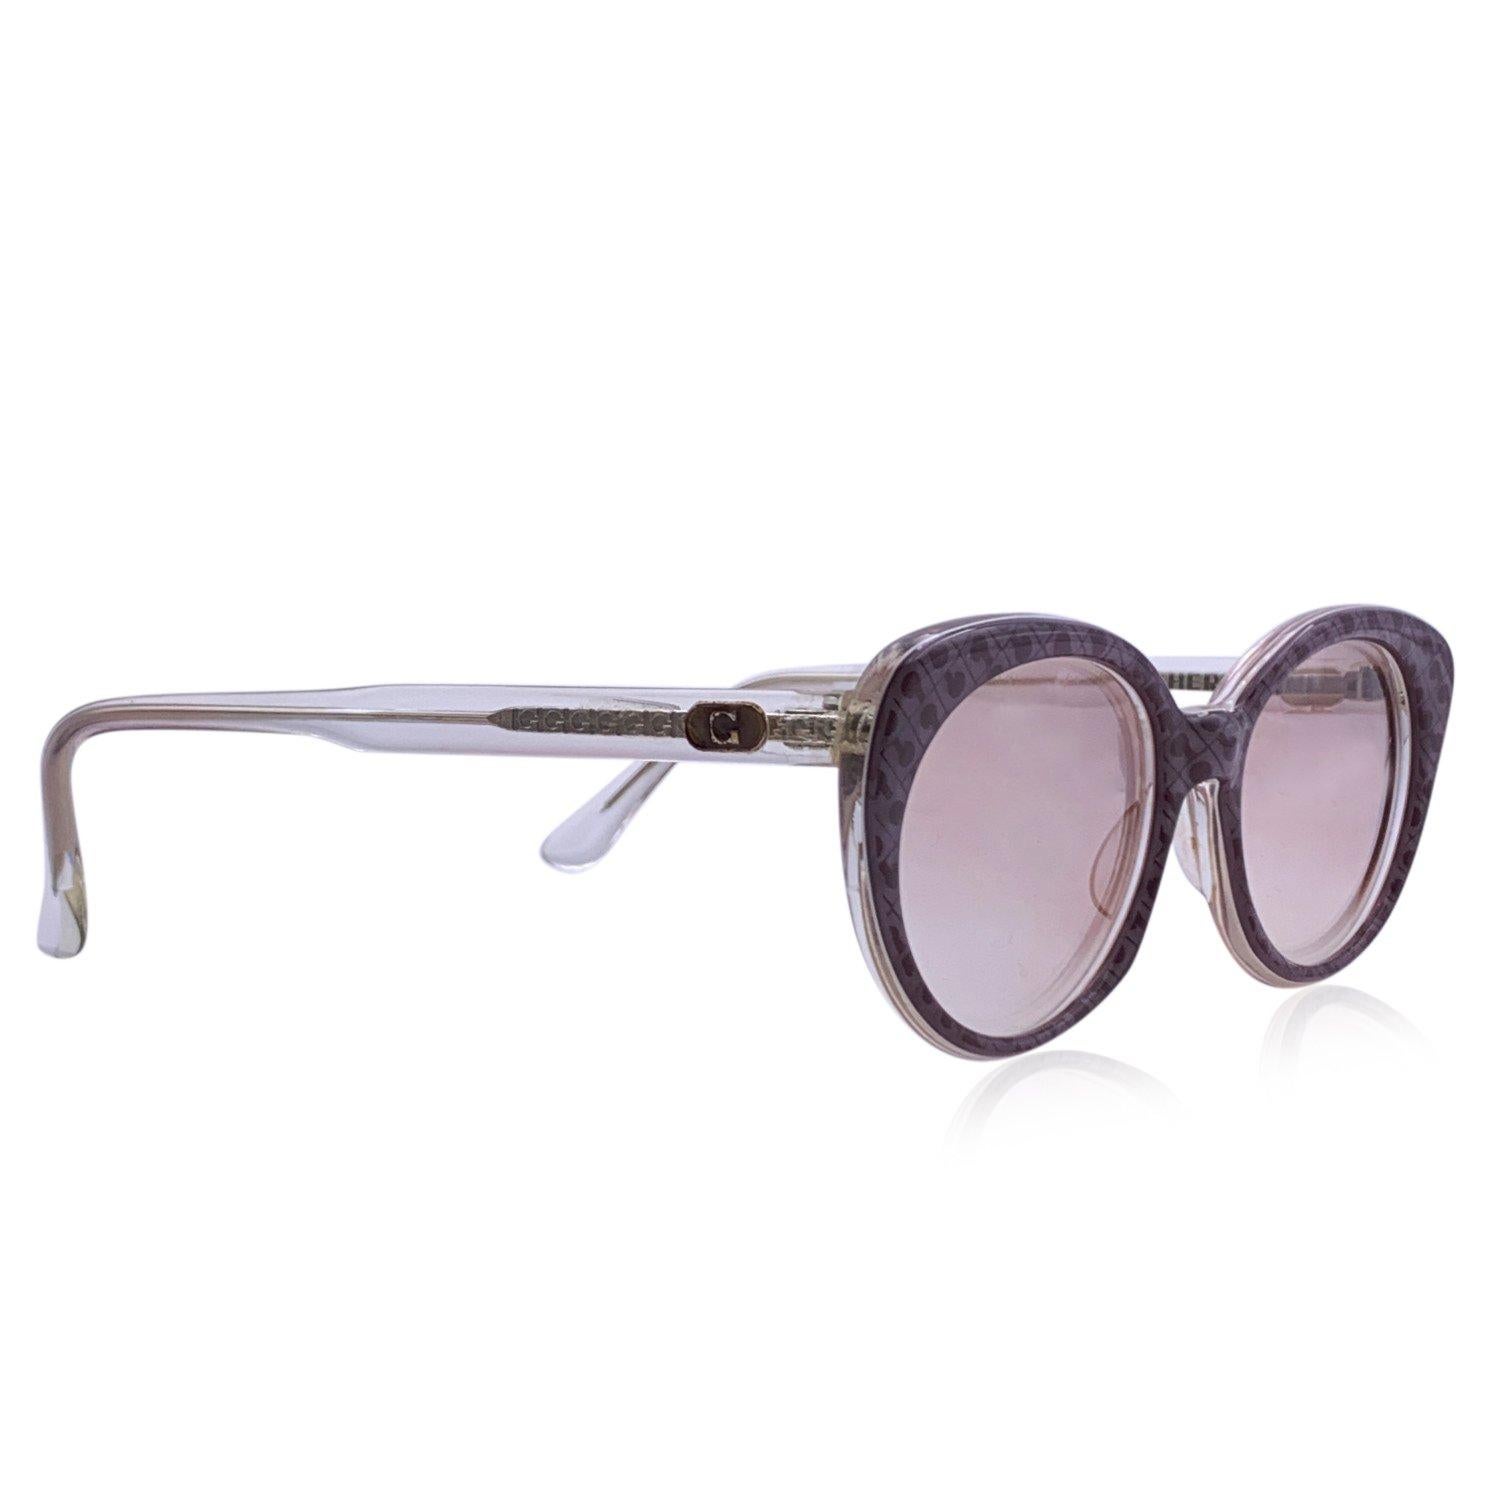 Vintage Gherardini sunglasses G/1. Grey acetate frame with logo pattern. Original 100% Total UVA/UVB protection in gradient brown color. Gherardini logo on temples. Made in Italy Details MATERIAL: Acetate COLOR: Grey MODEL: G/1 GENDER: Women COUNTRY